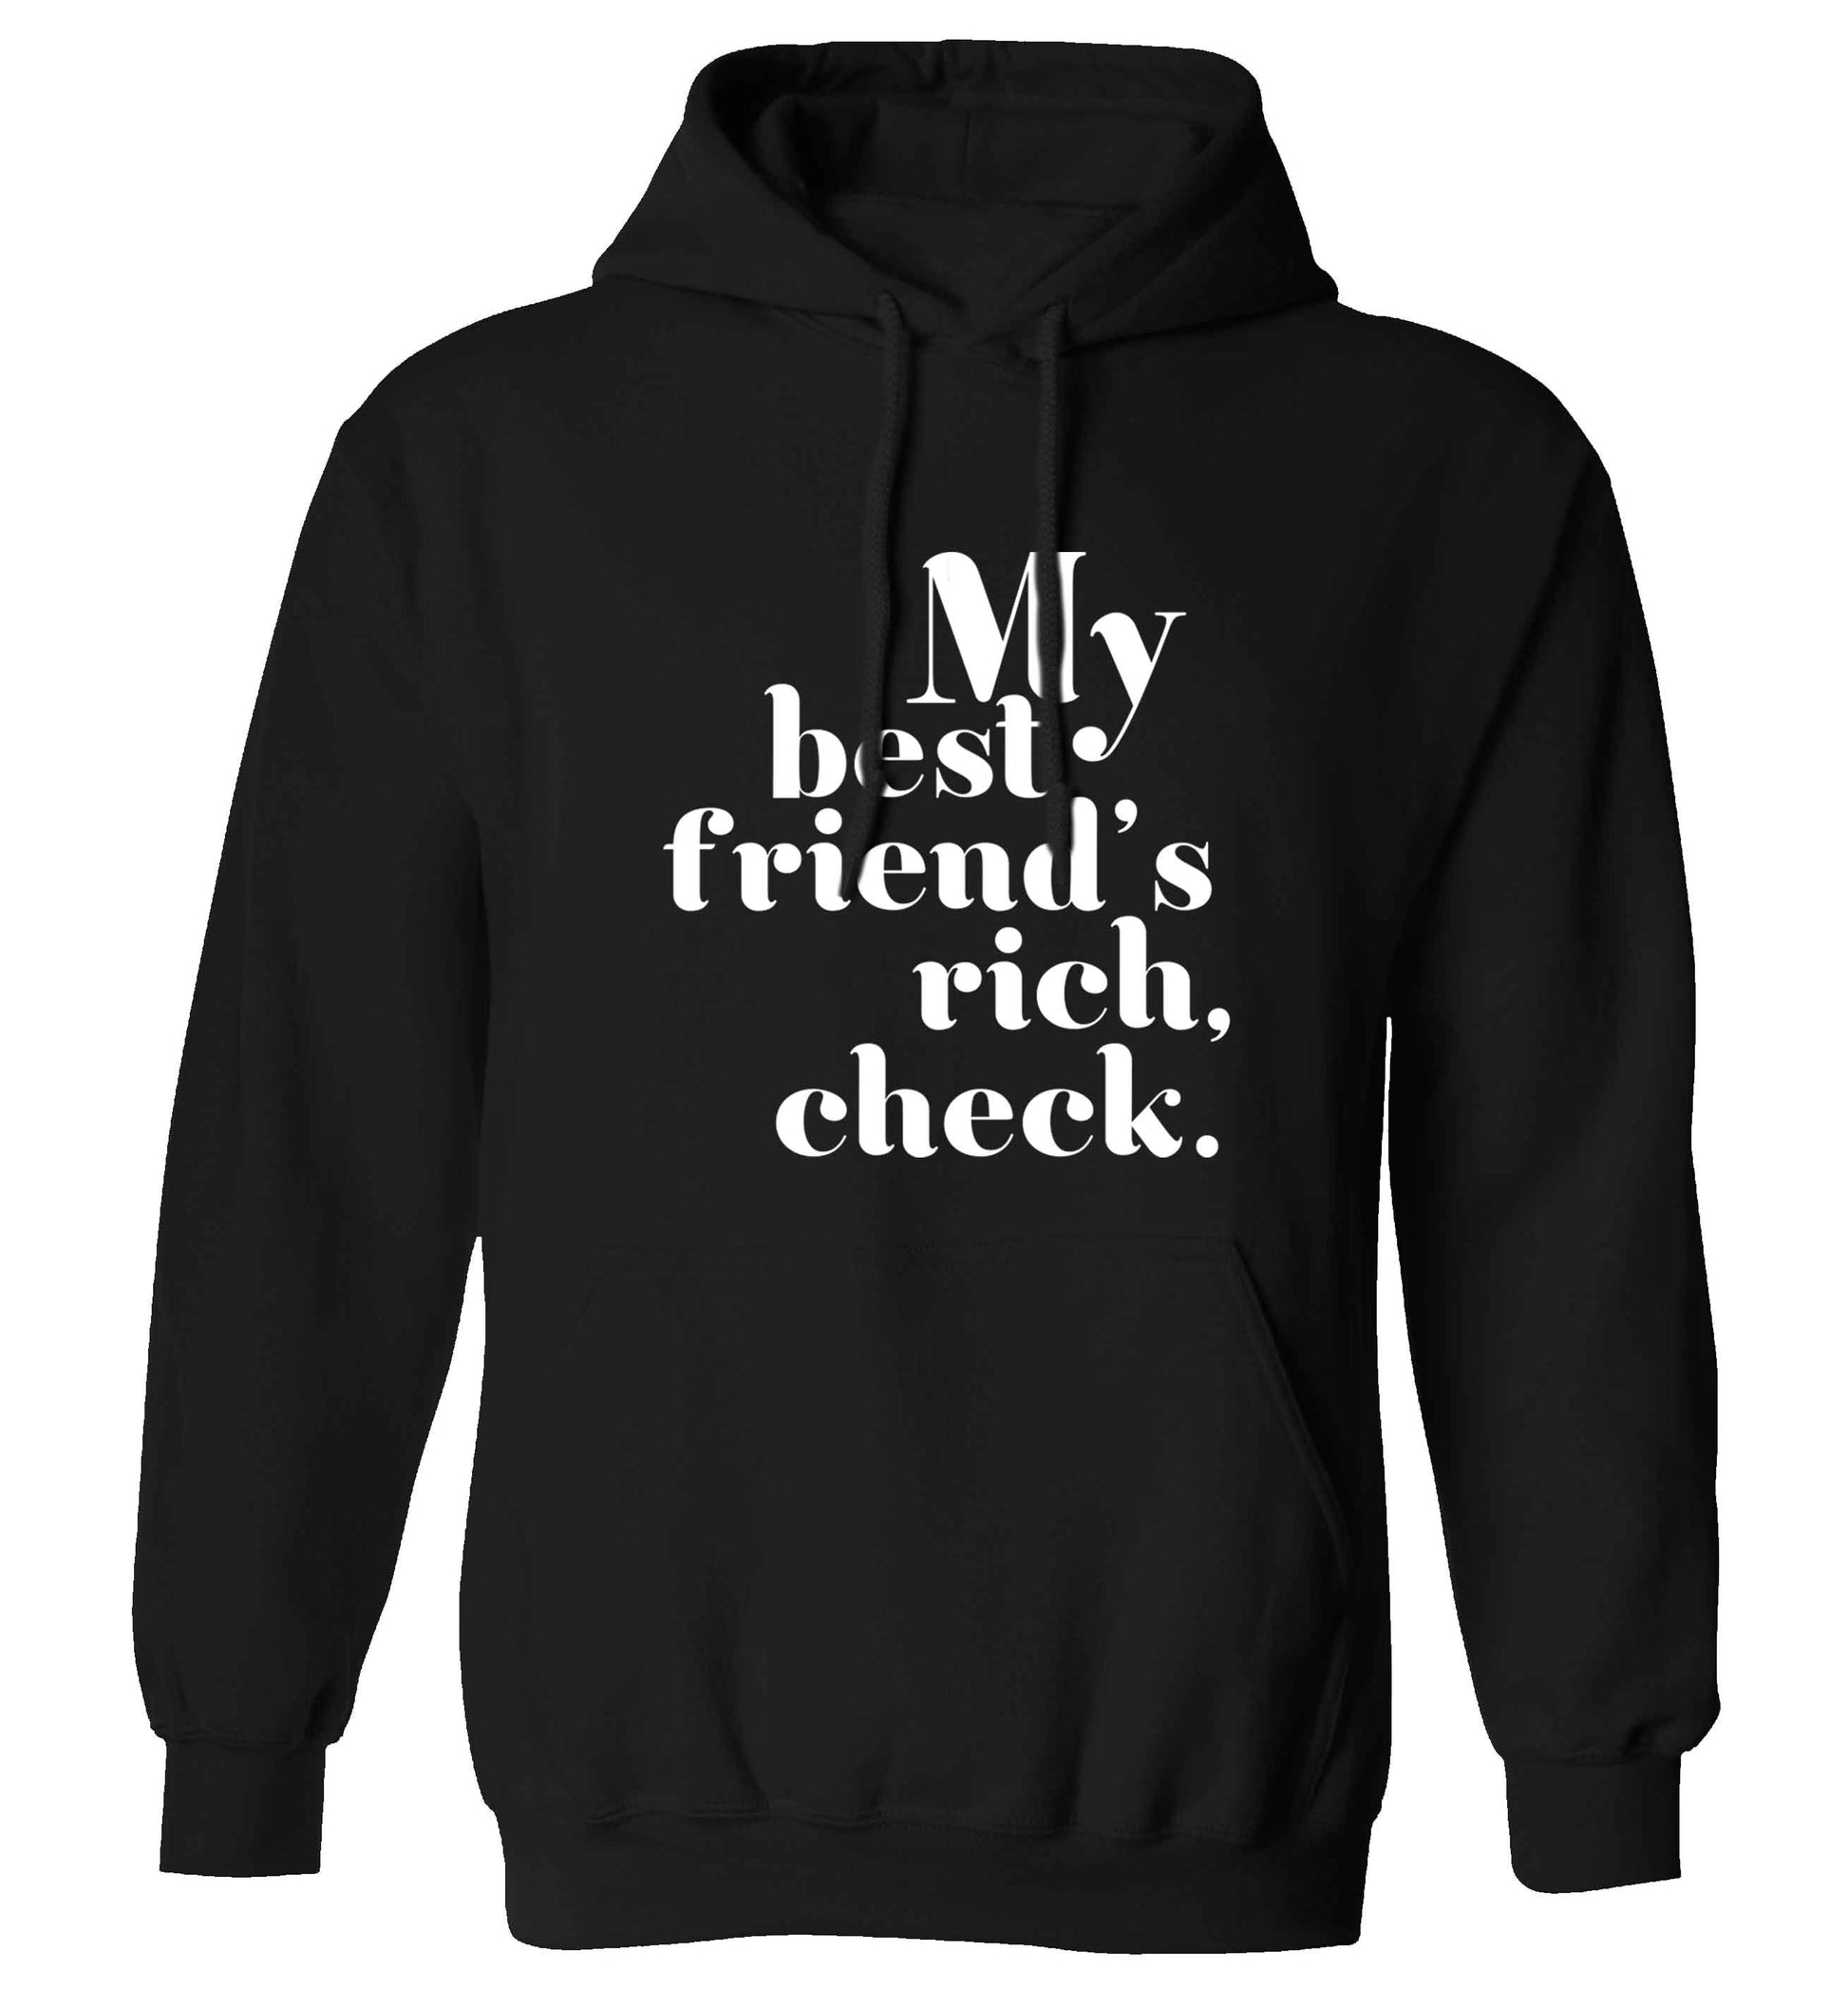 Got a rich best friend? Why not ask them to get you this, just let us  know and we'll tripple the price ;)  adults unisex black hoodie 2XL